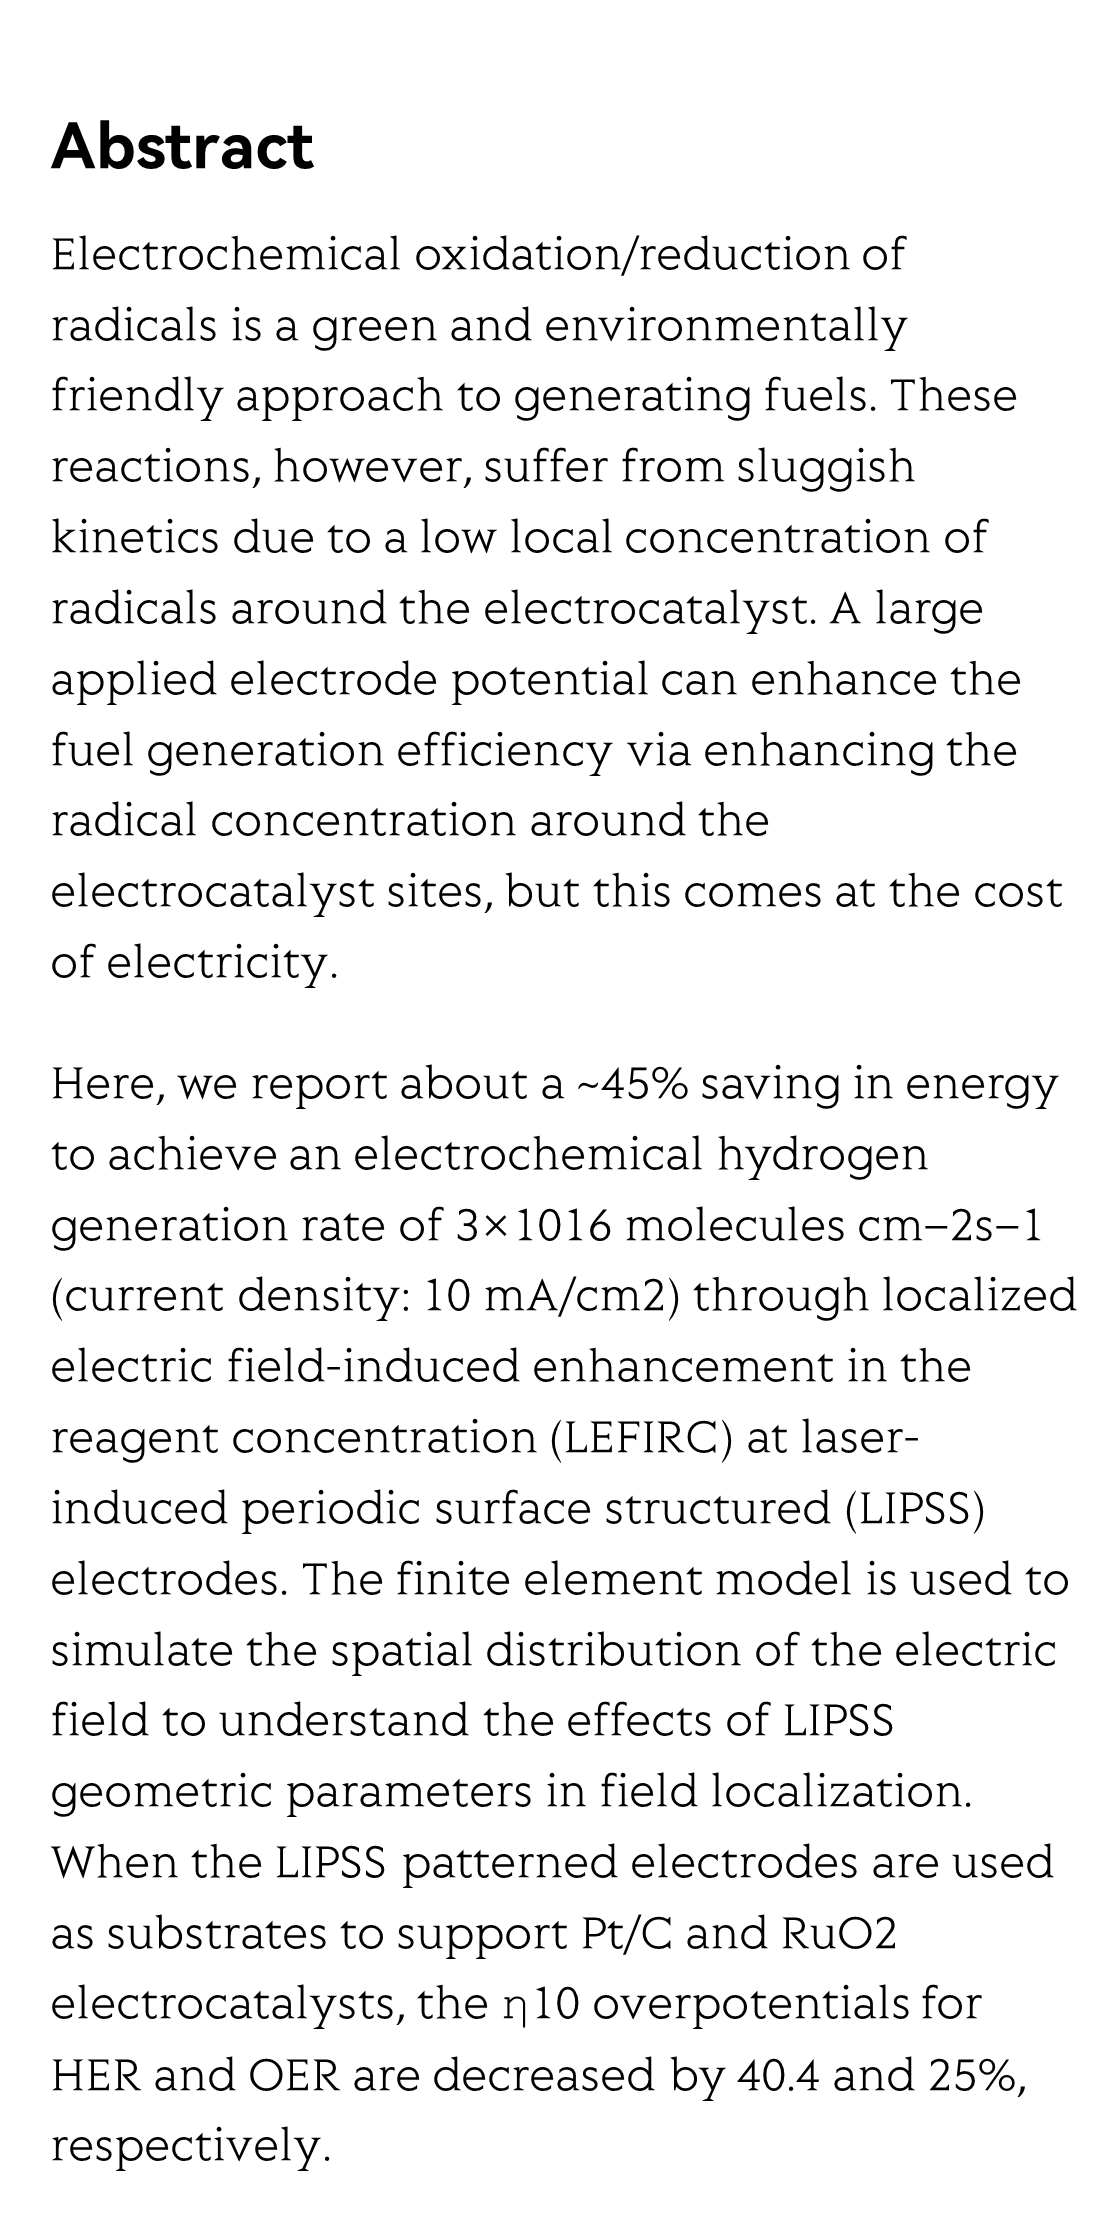 Laser-induced periodic surface structured electrodes with 45% energy saving in electrochemical fuel generation through field localization_2